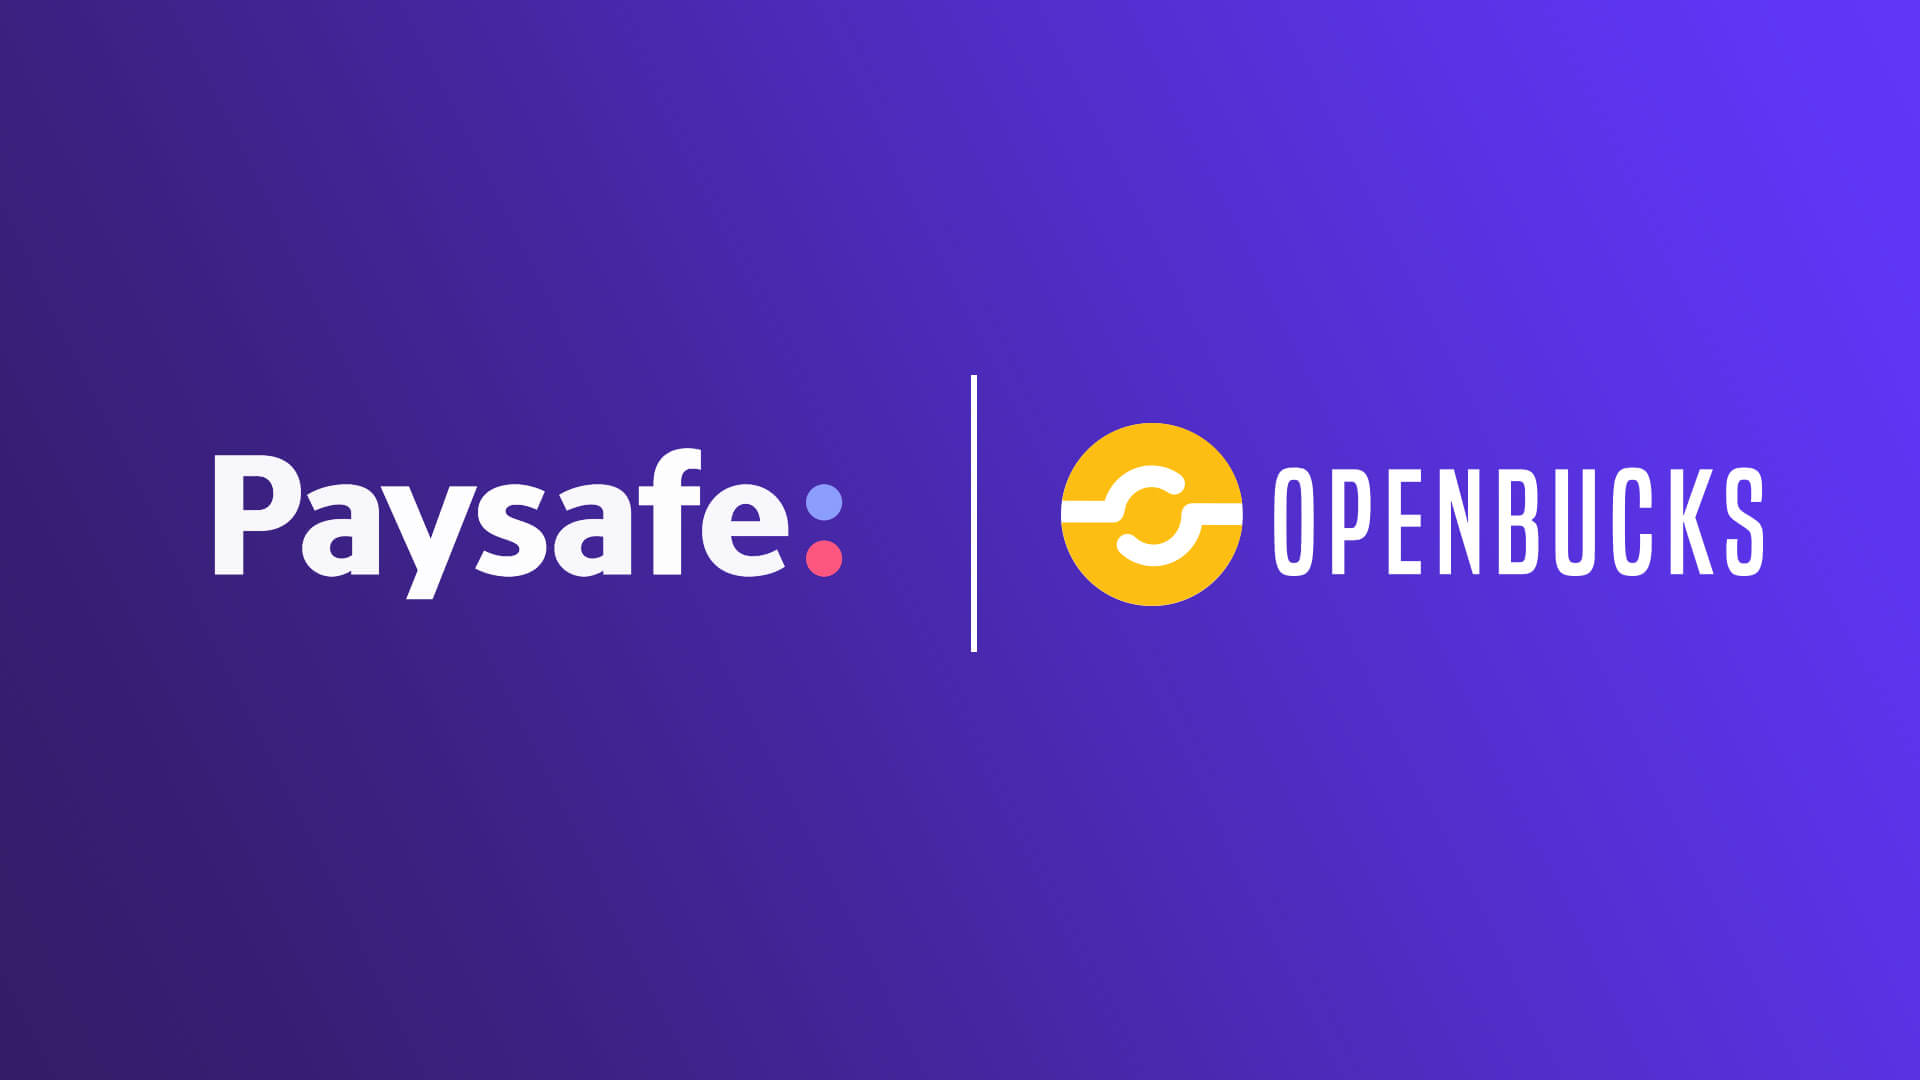 Openbucks acquired by Paysafe Group ps.jpg